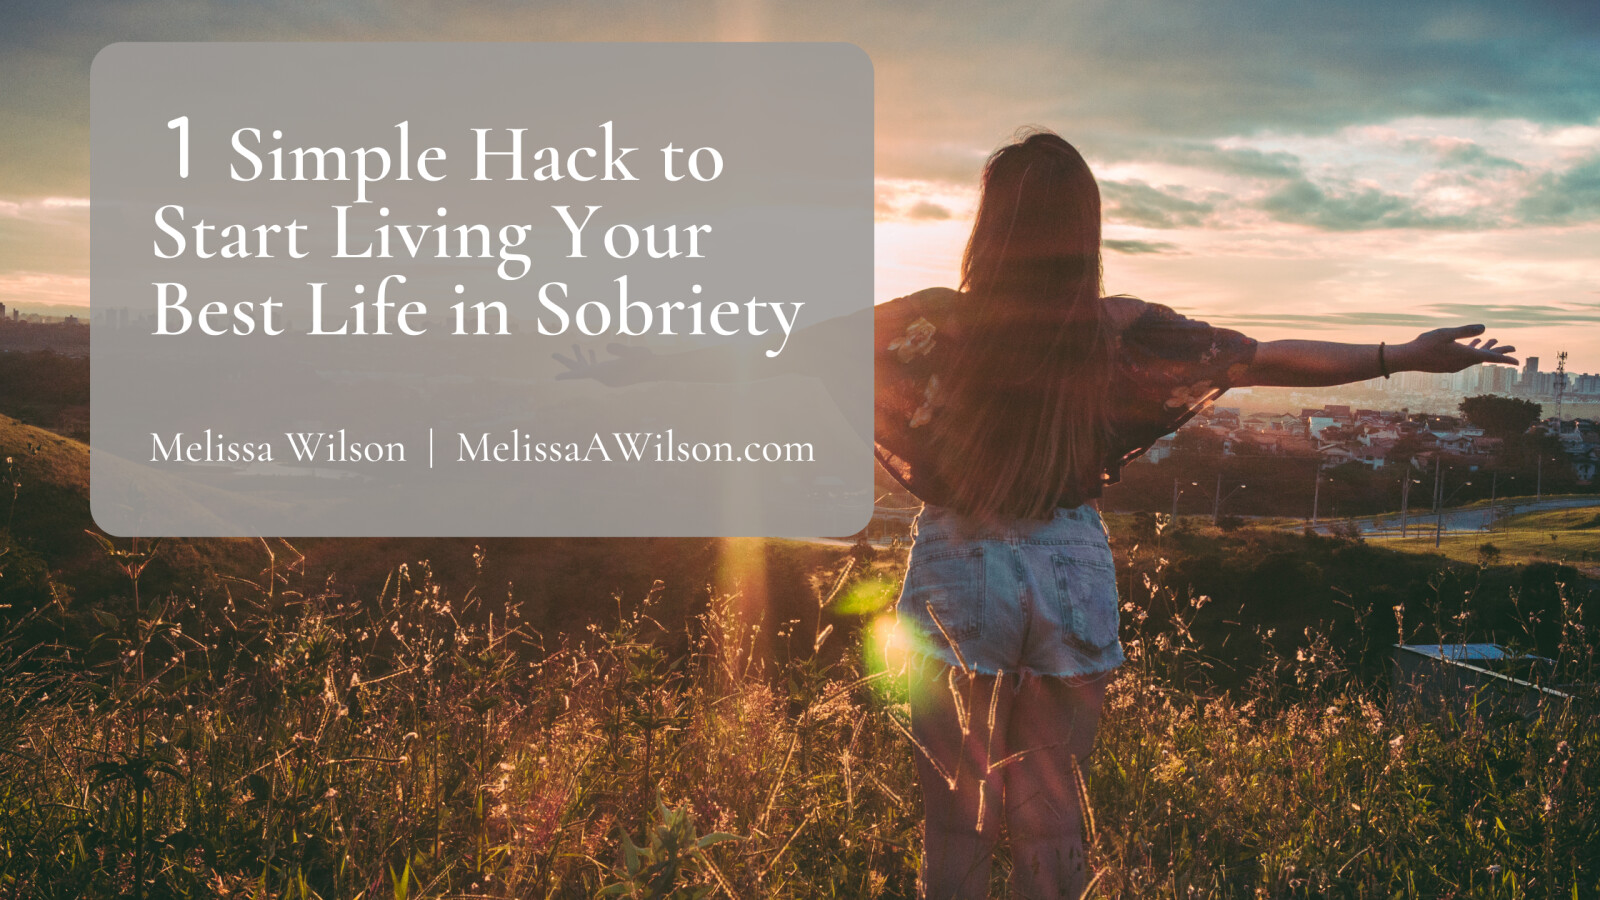 1 Simple Hack to Start Living Your Best Life in Sobriety